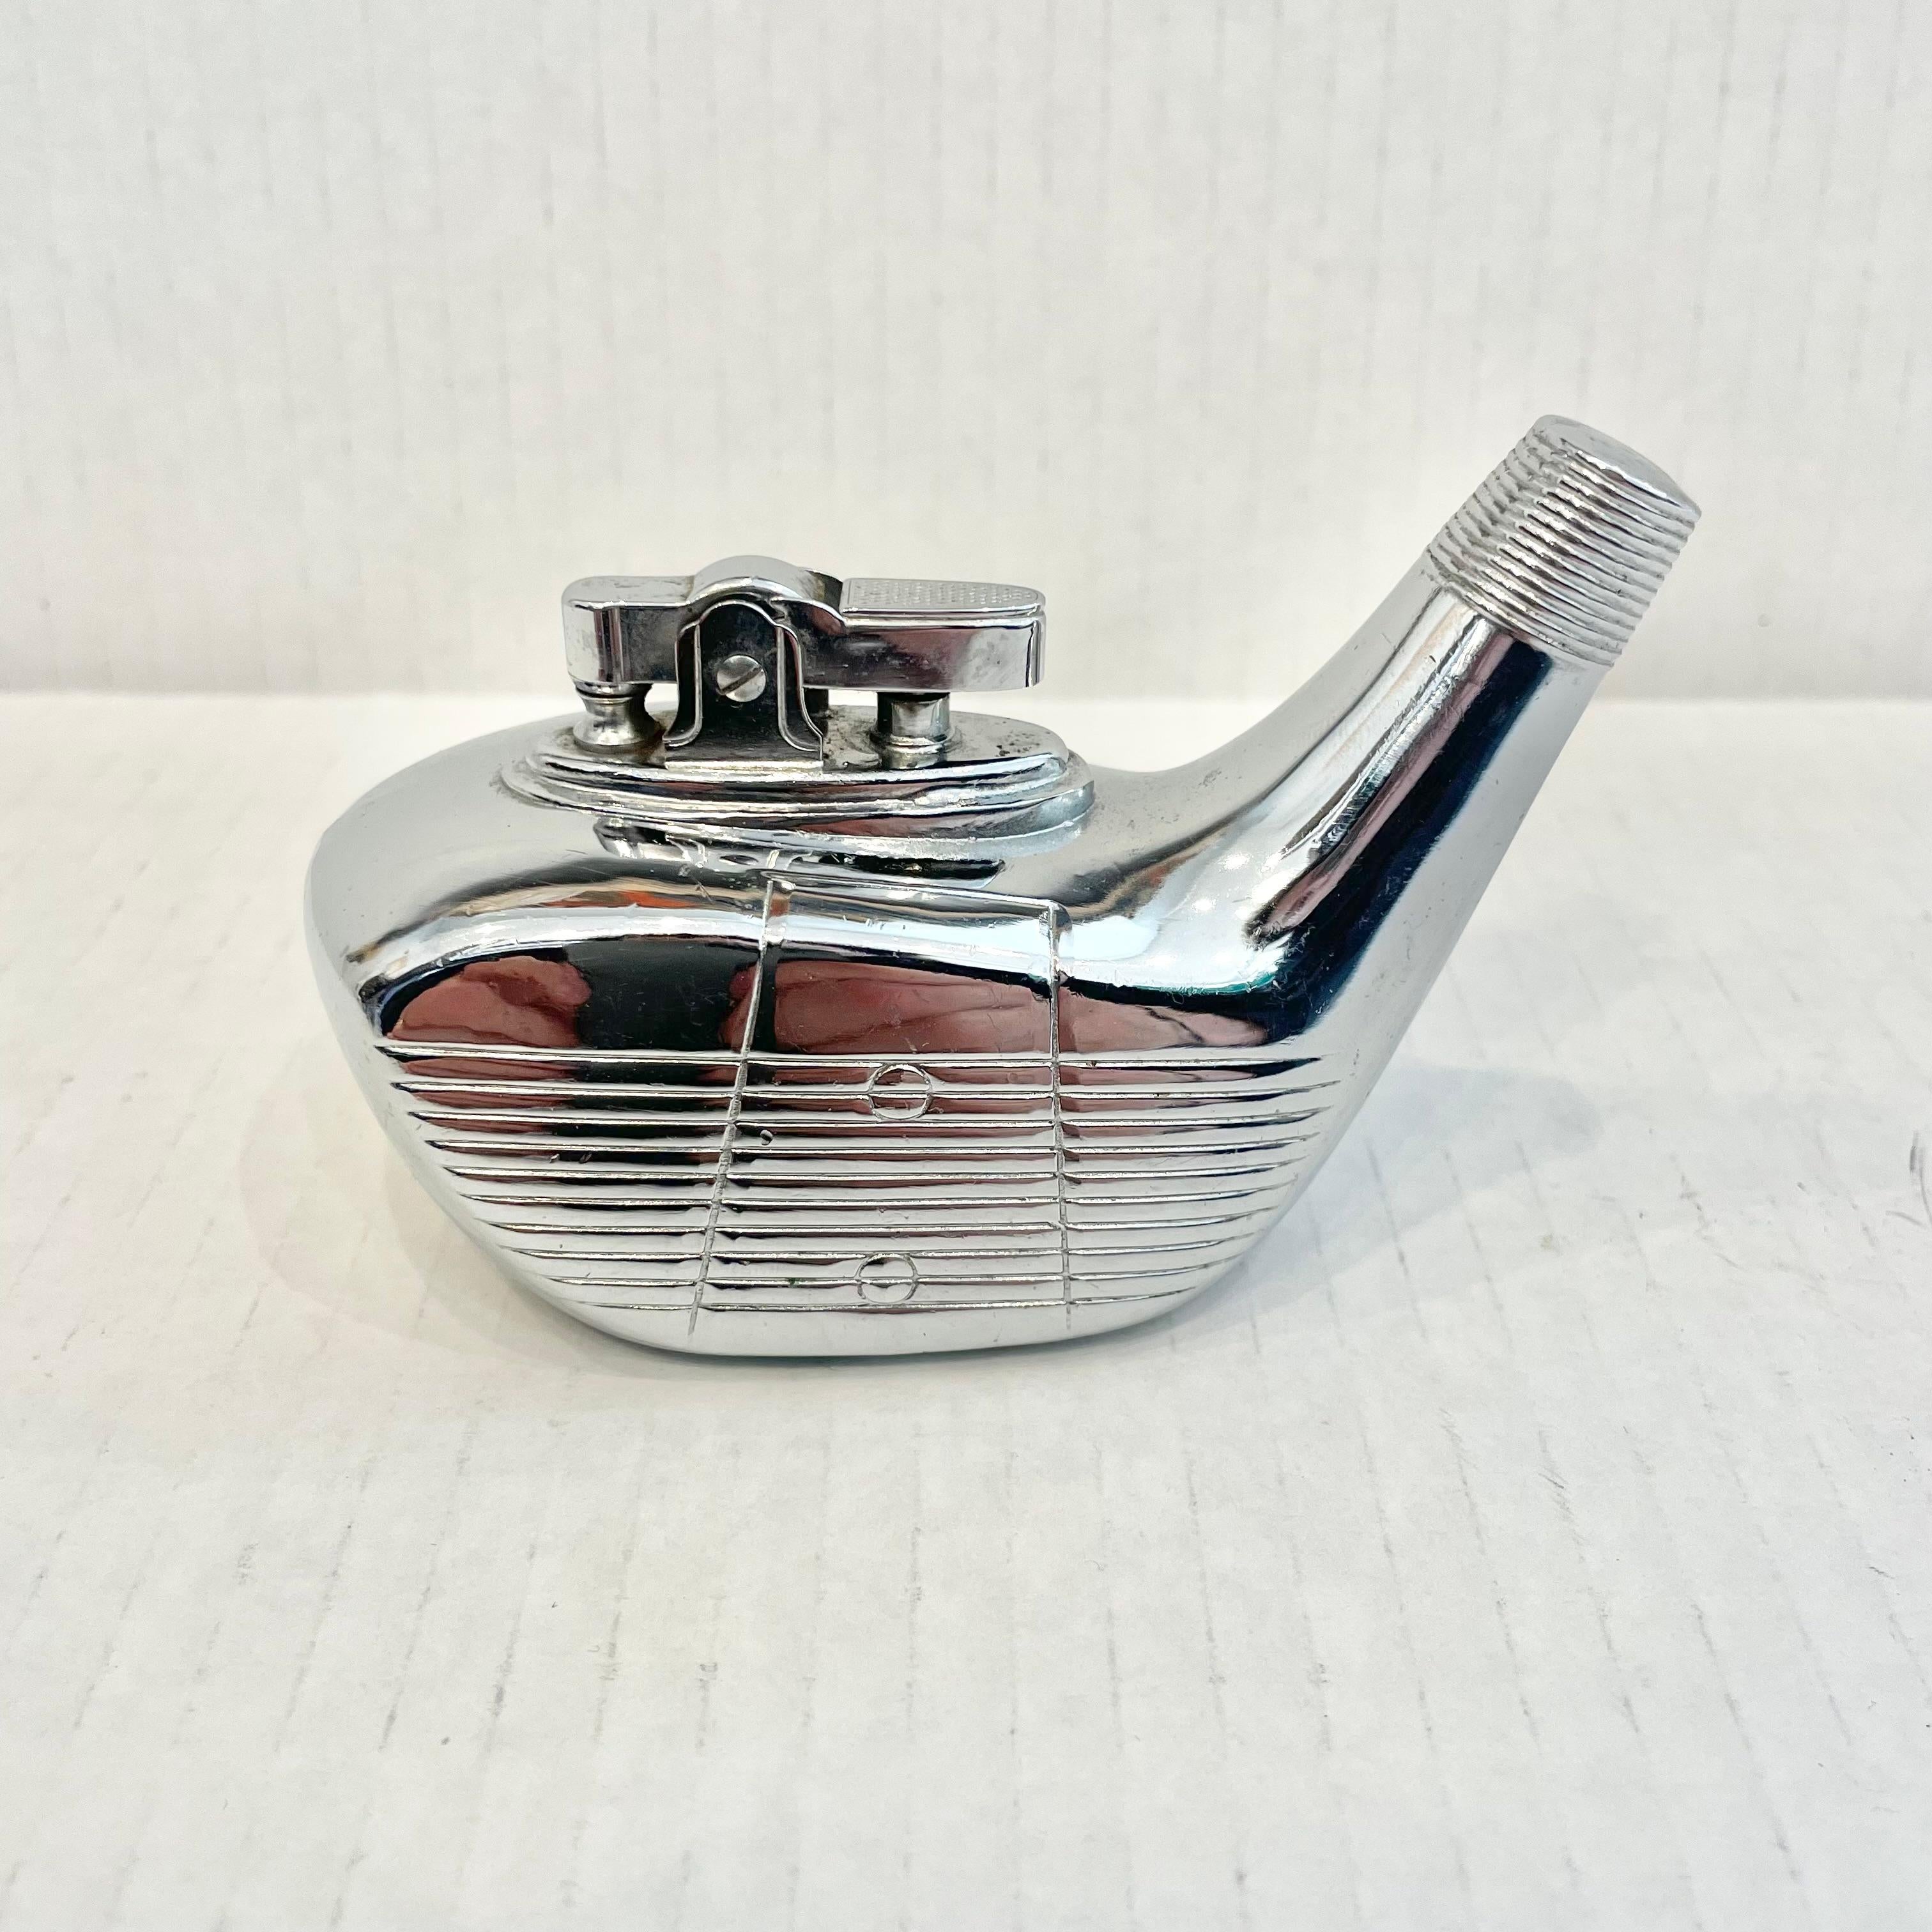 Cool vintage table lighter in the shape of a golf club driving head. Made completely of metal with a hollow body. Beautiful silver color with details like a grooved face. Cool tobacco accessory and conversation piece. Working lighter. Very unusual